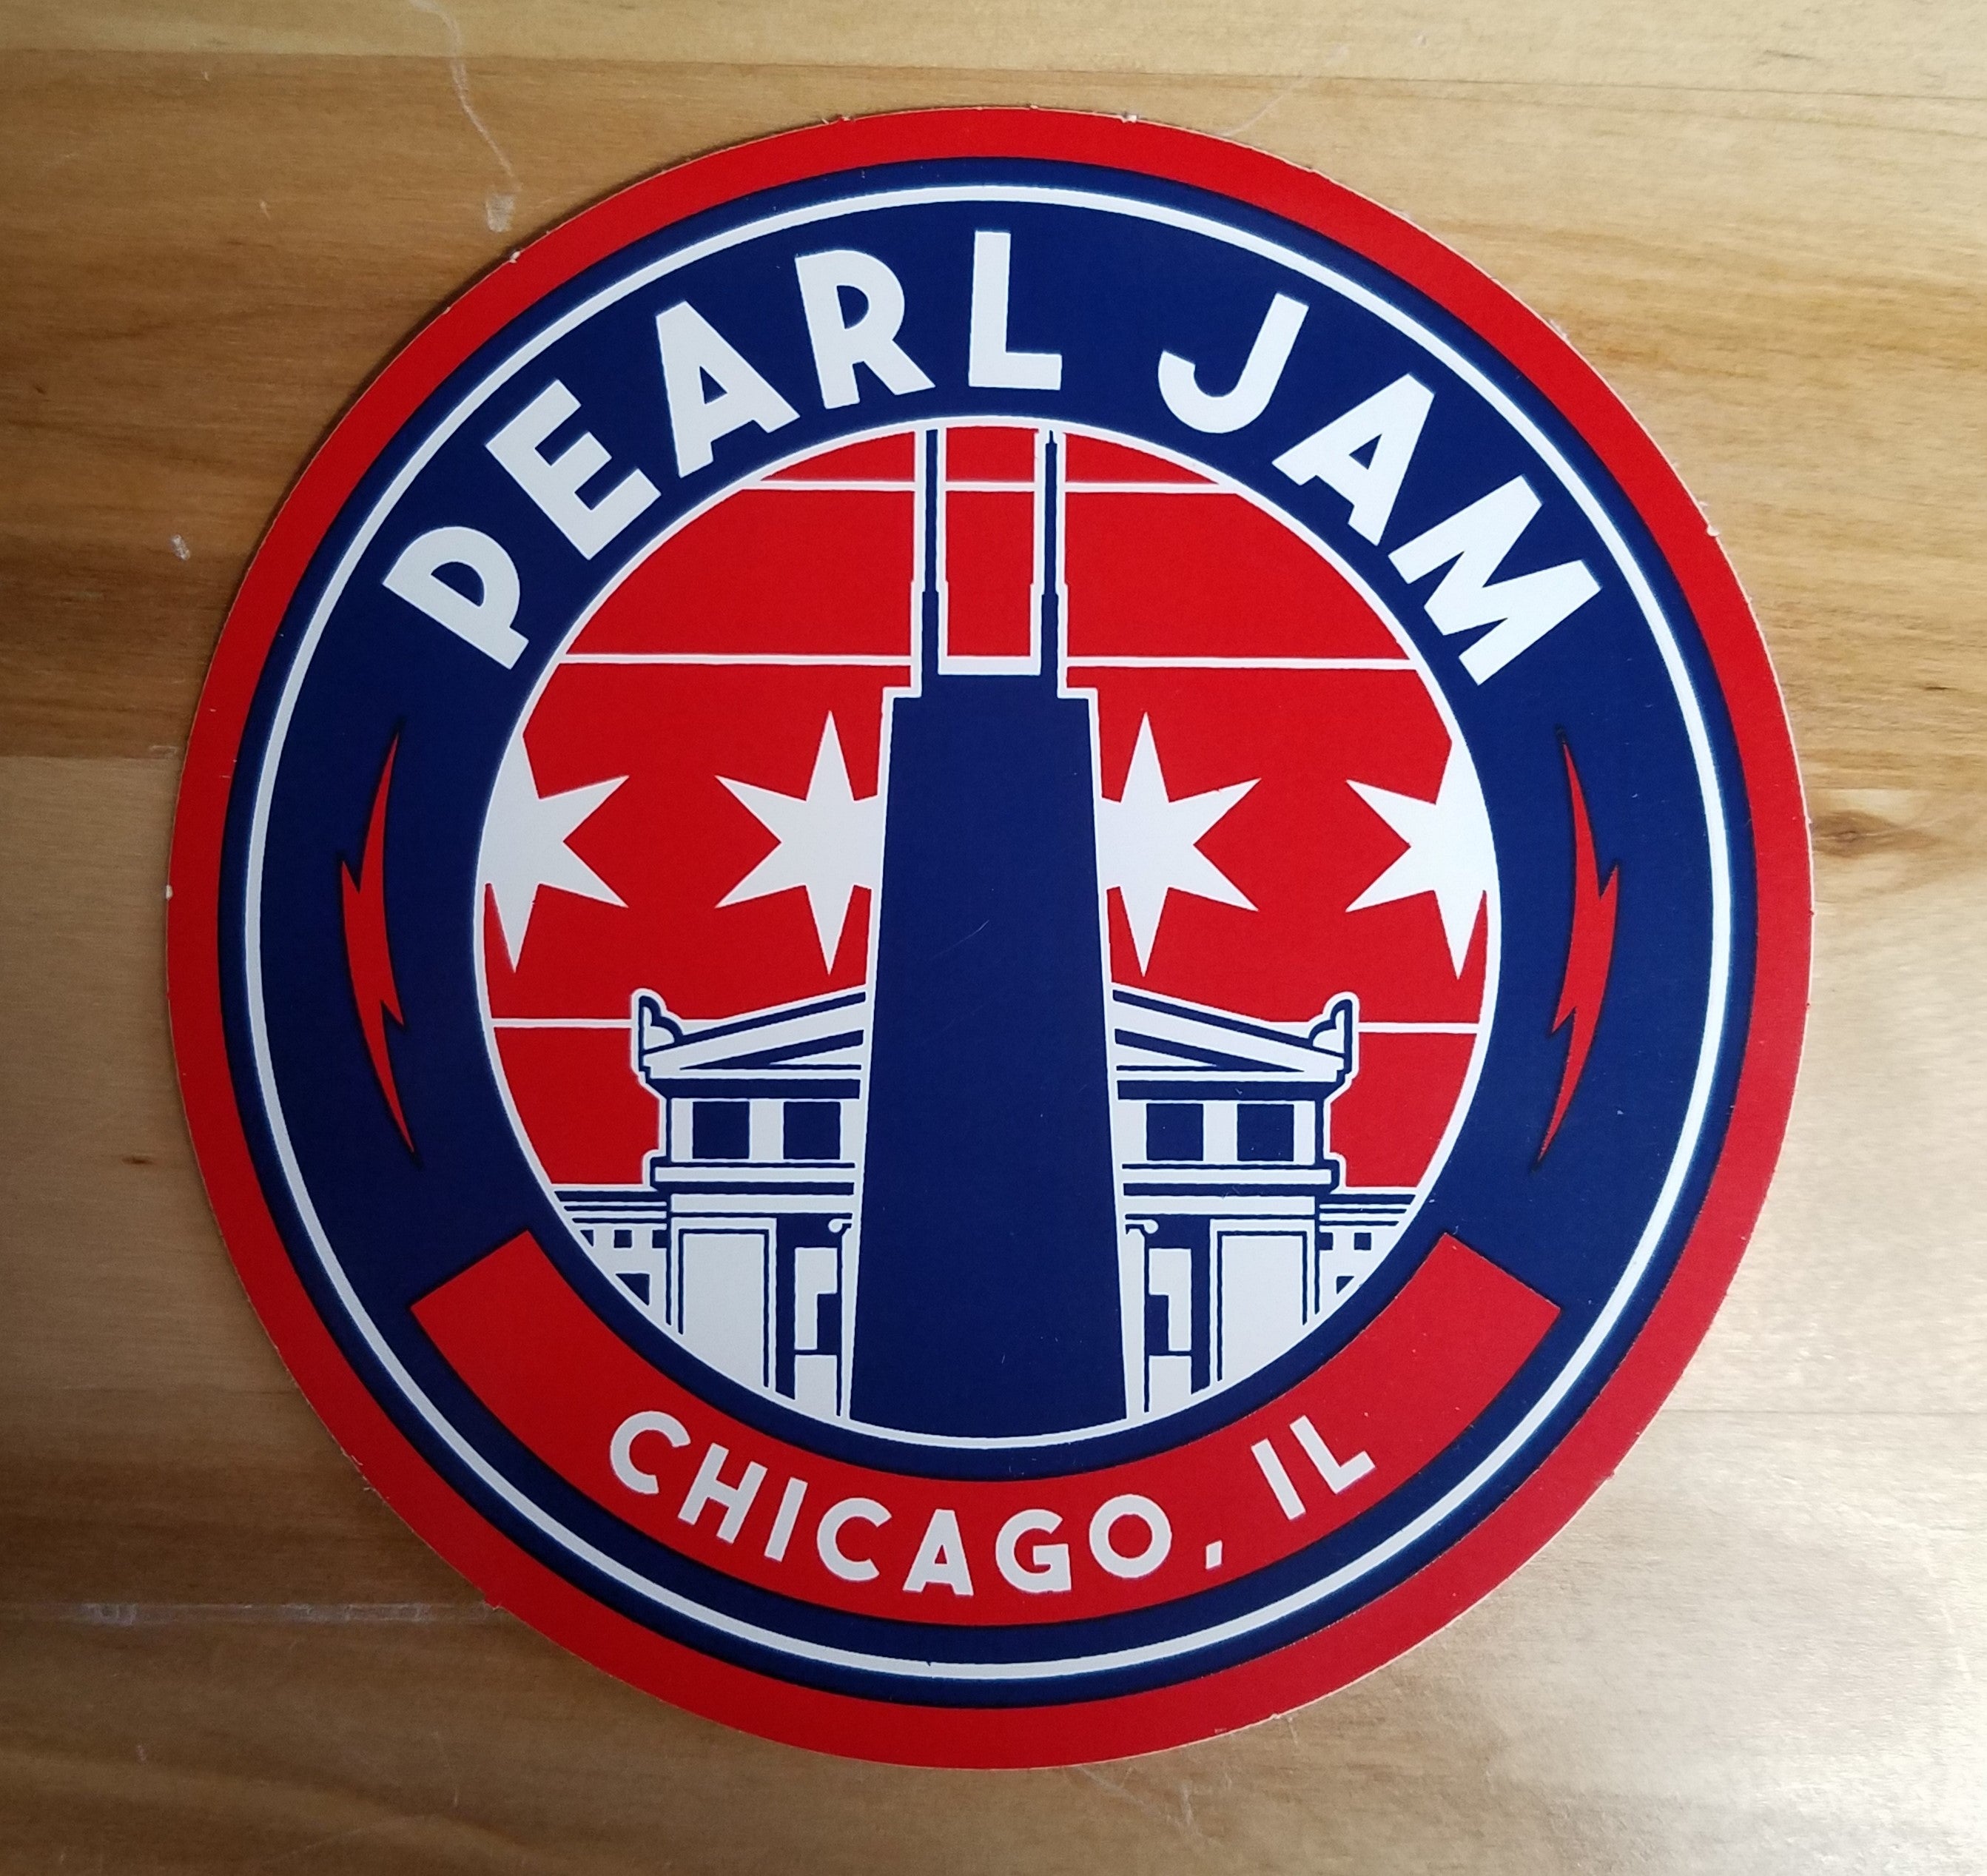 Title: Pearl Jam Wrigley Field Sticker Type: Sticker Size: 4" x 4" Notes: Purchased from the Pearl Jam Merch Tent outside of Wrigley field on August 16, 2018